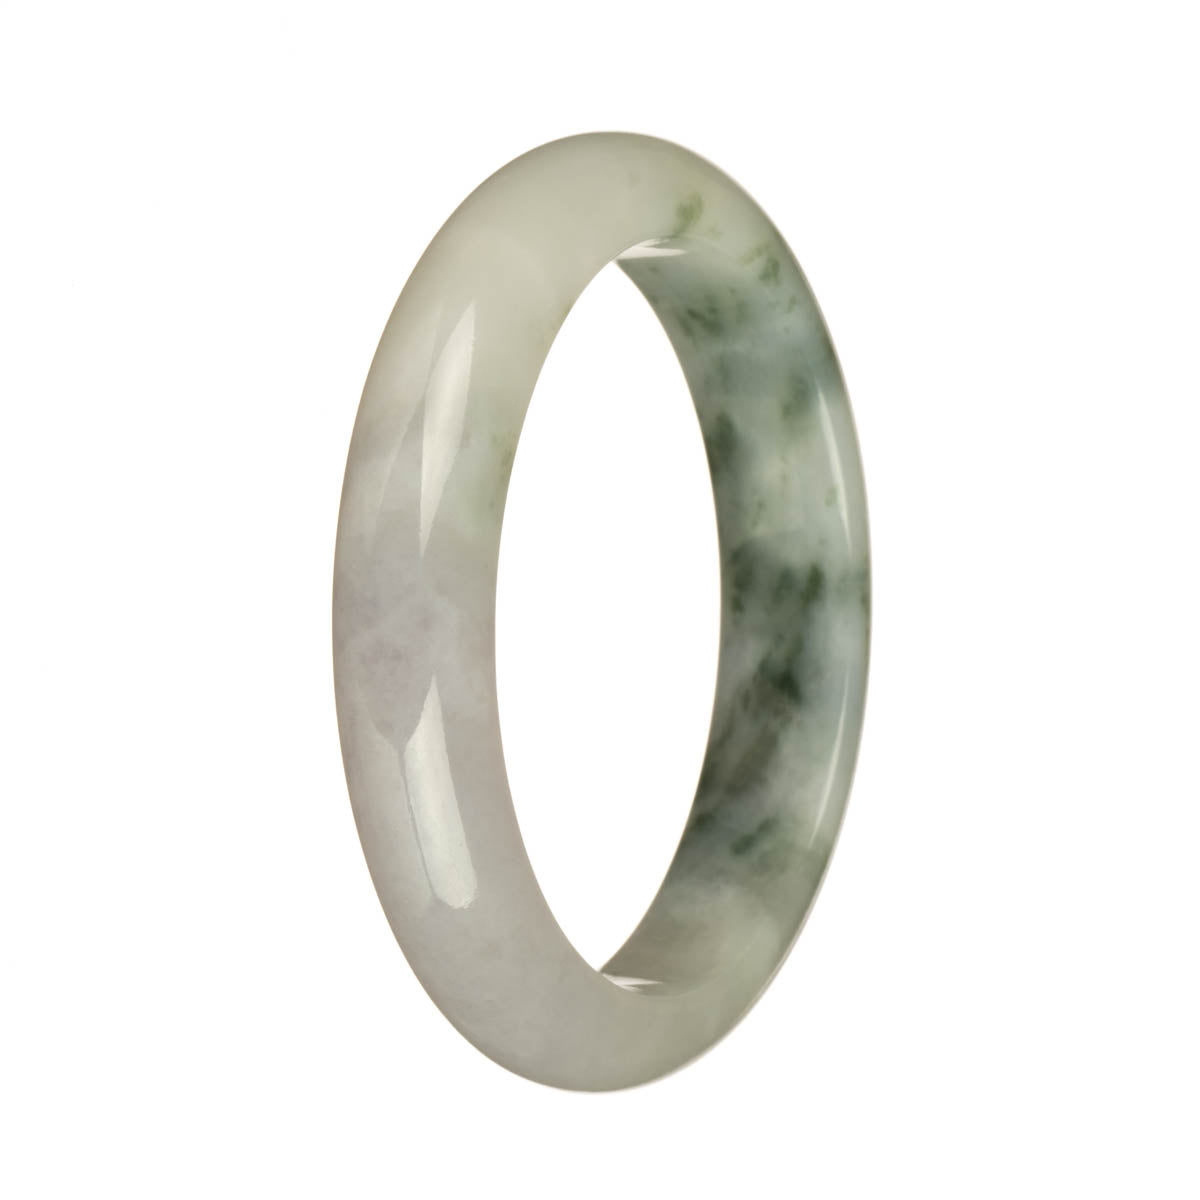 58.4mm White and Pale Lavender with Green Patterns Jade Bangle Bracelet